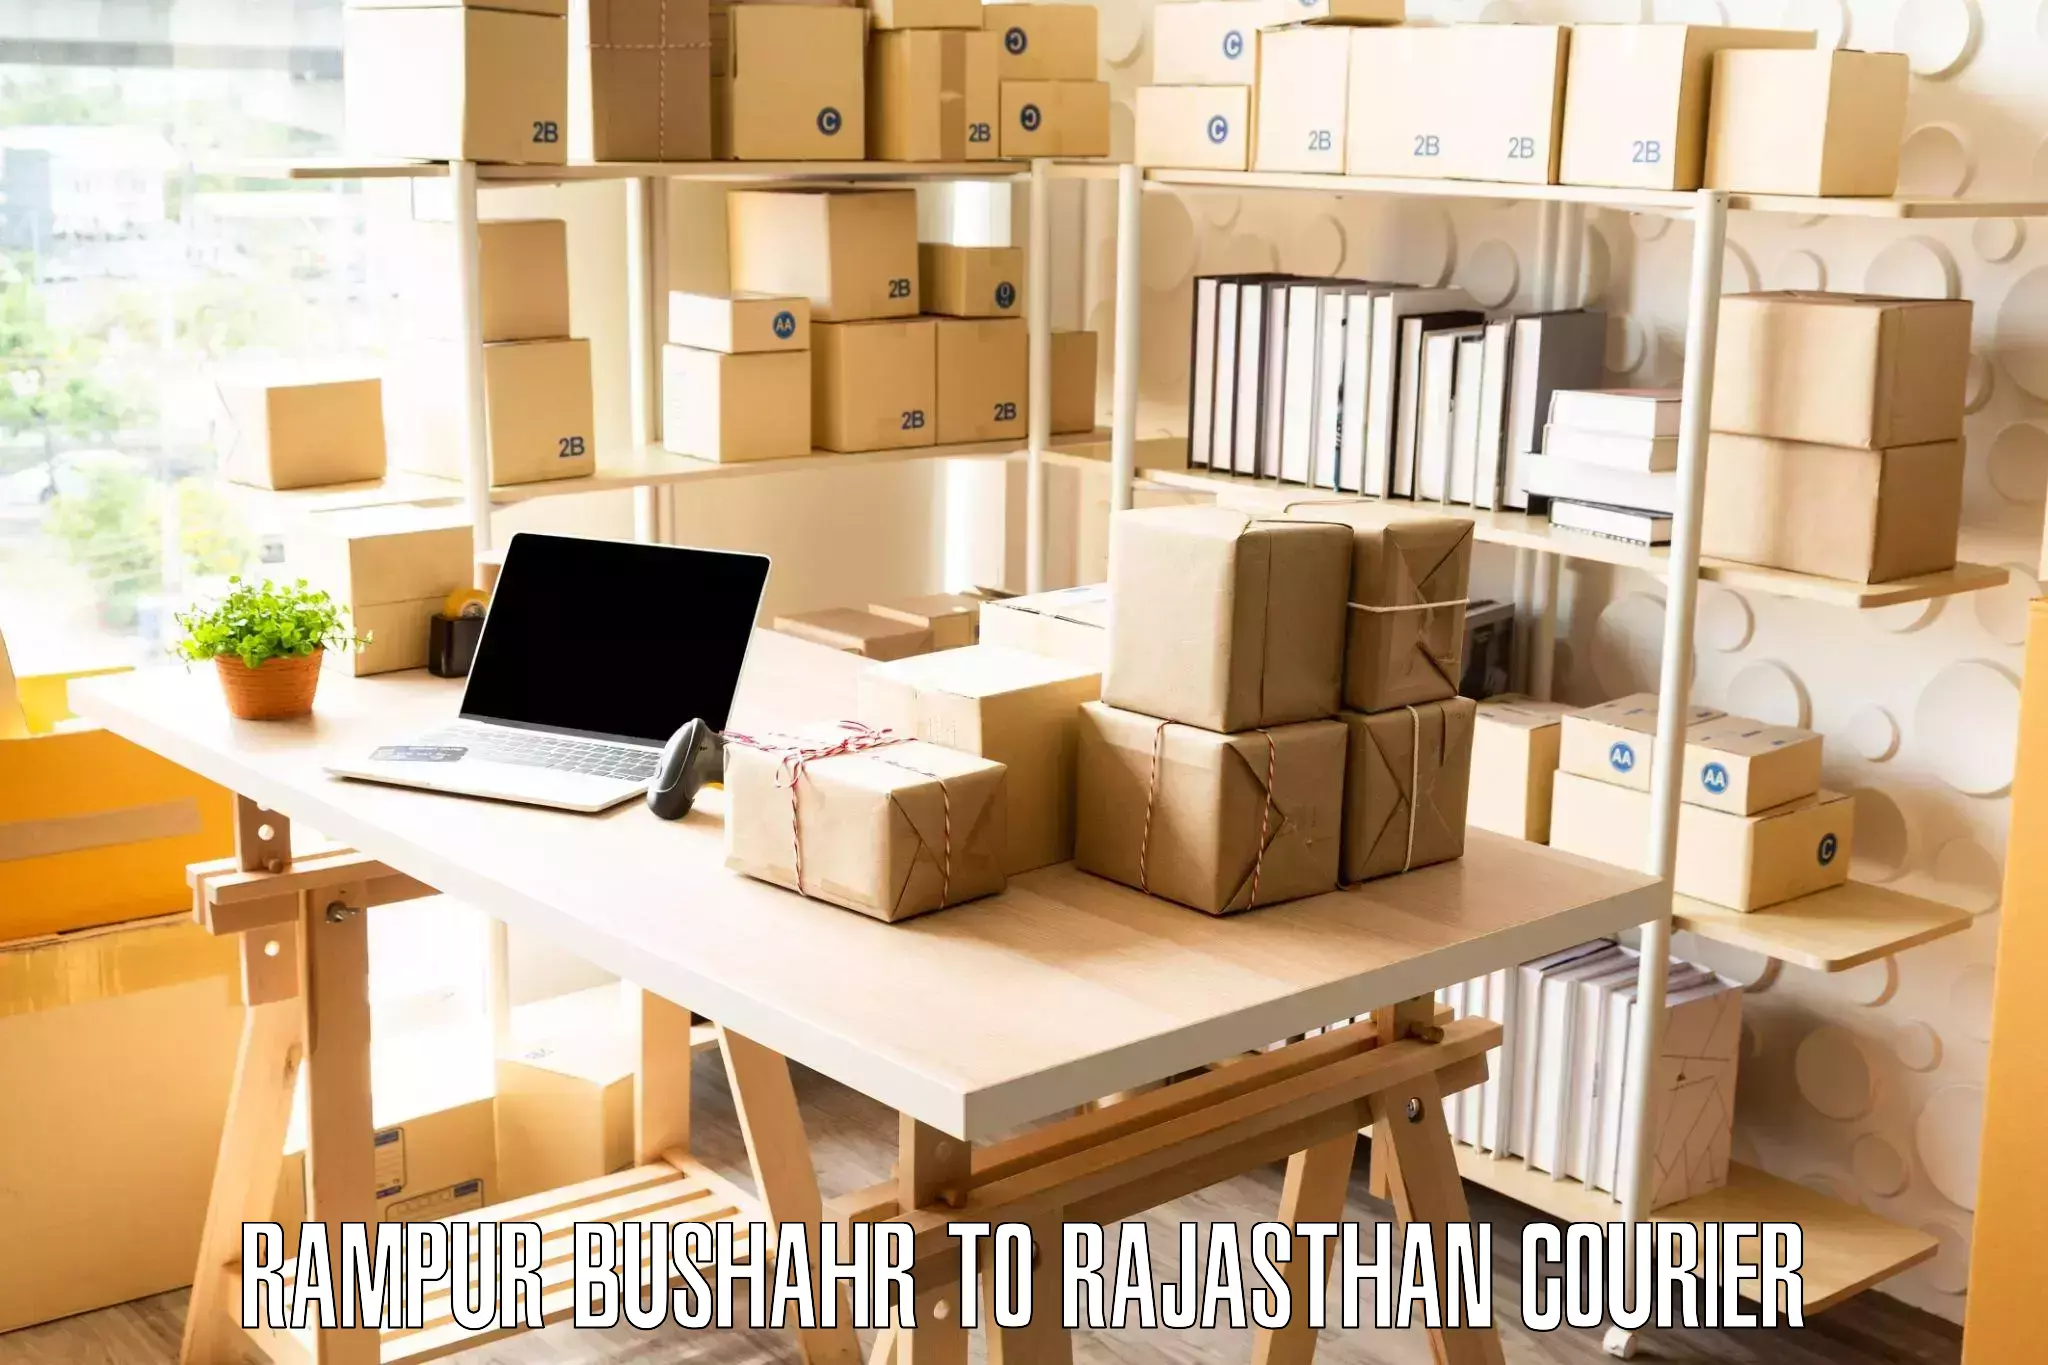 Moving and handling services Rampur Bushahr to Ajmer